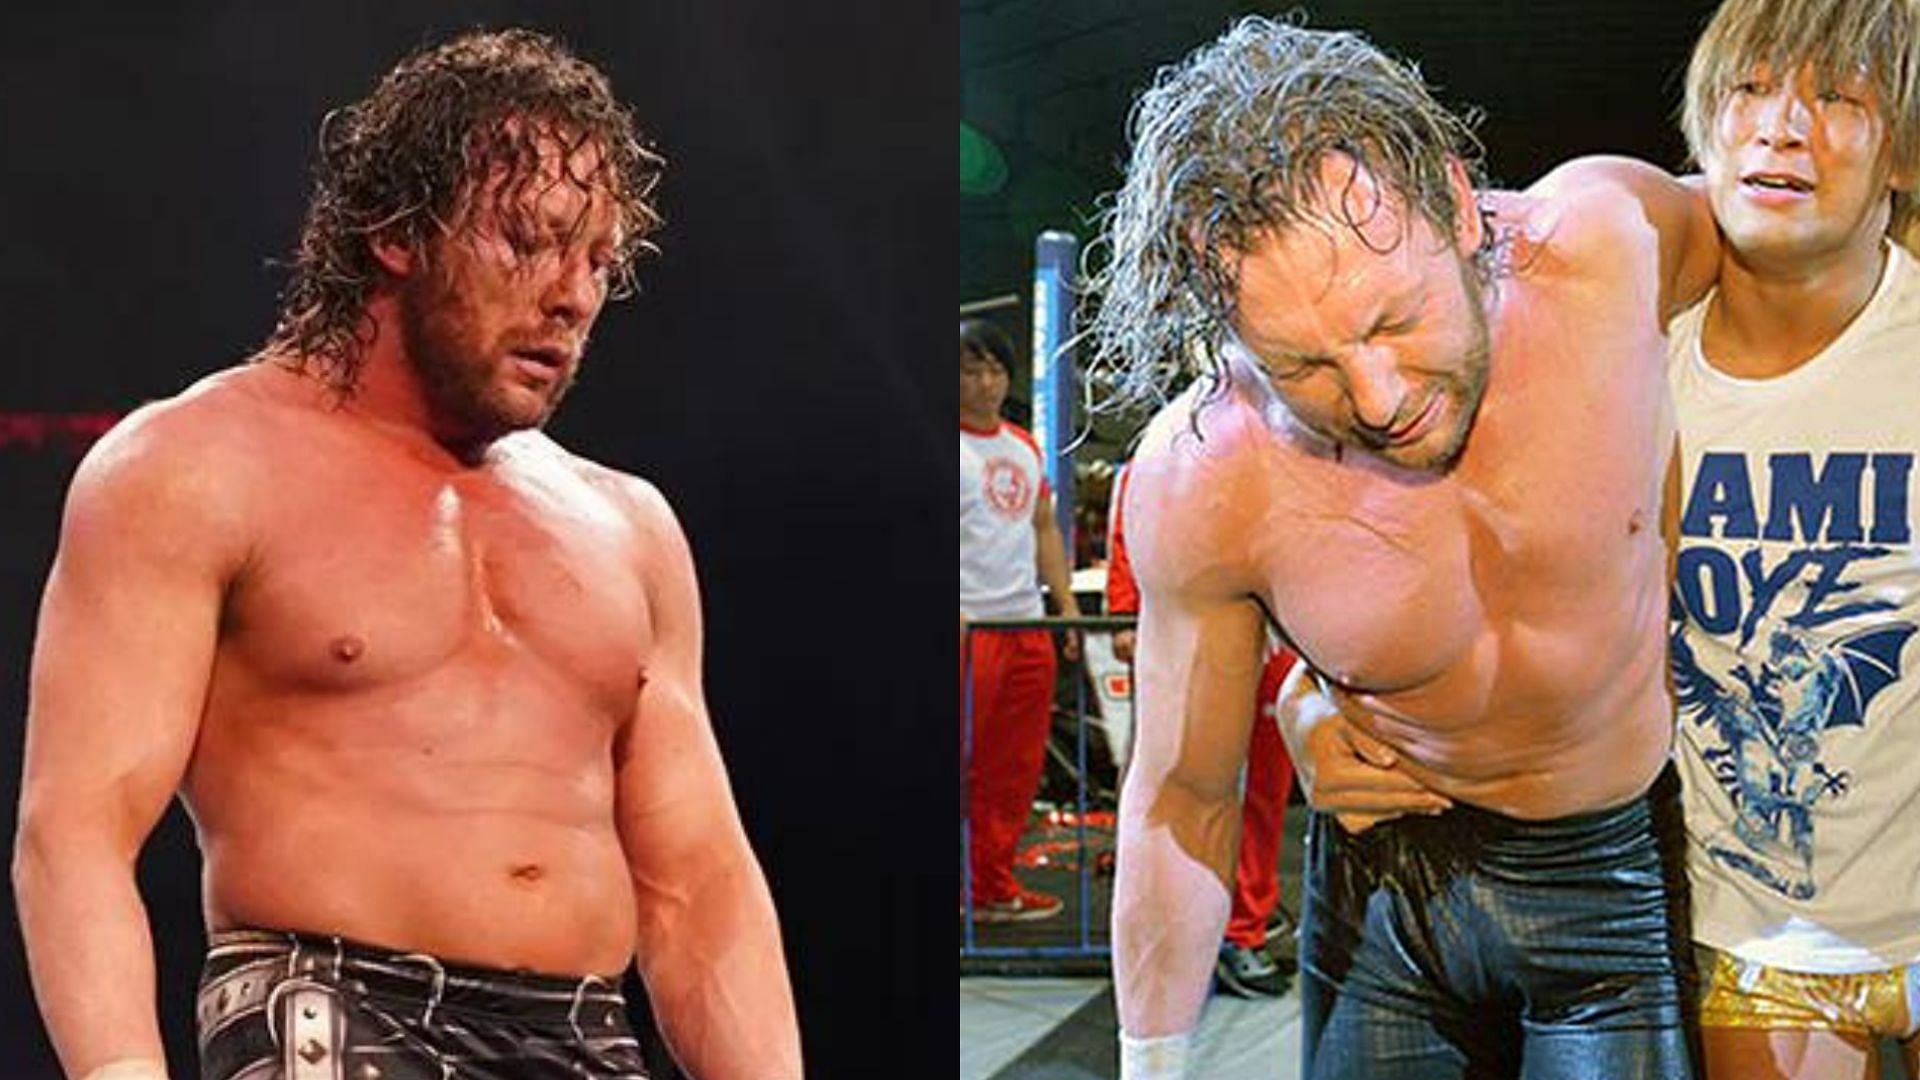 Kenny Omega will challenge Will Ospreay at Wrestle Kingdom 17